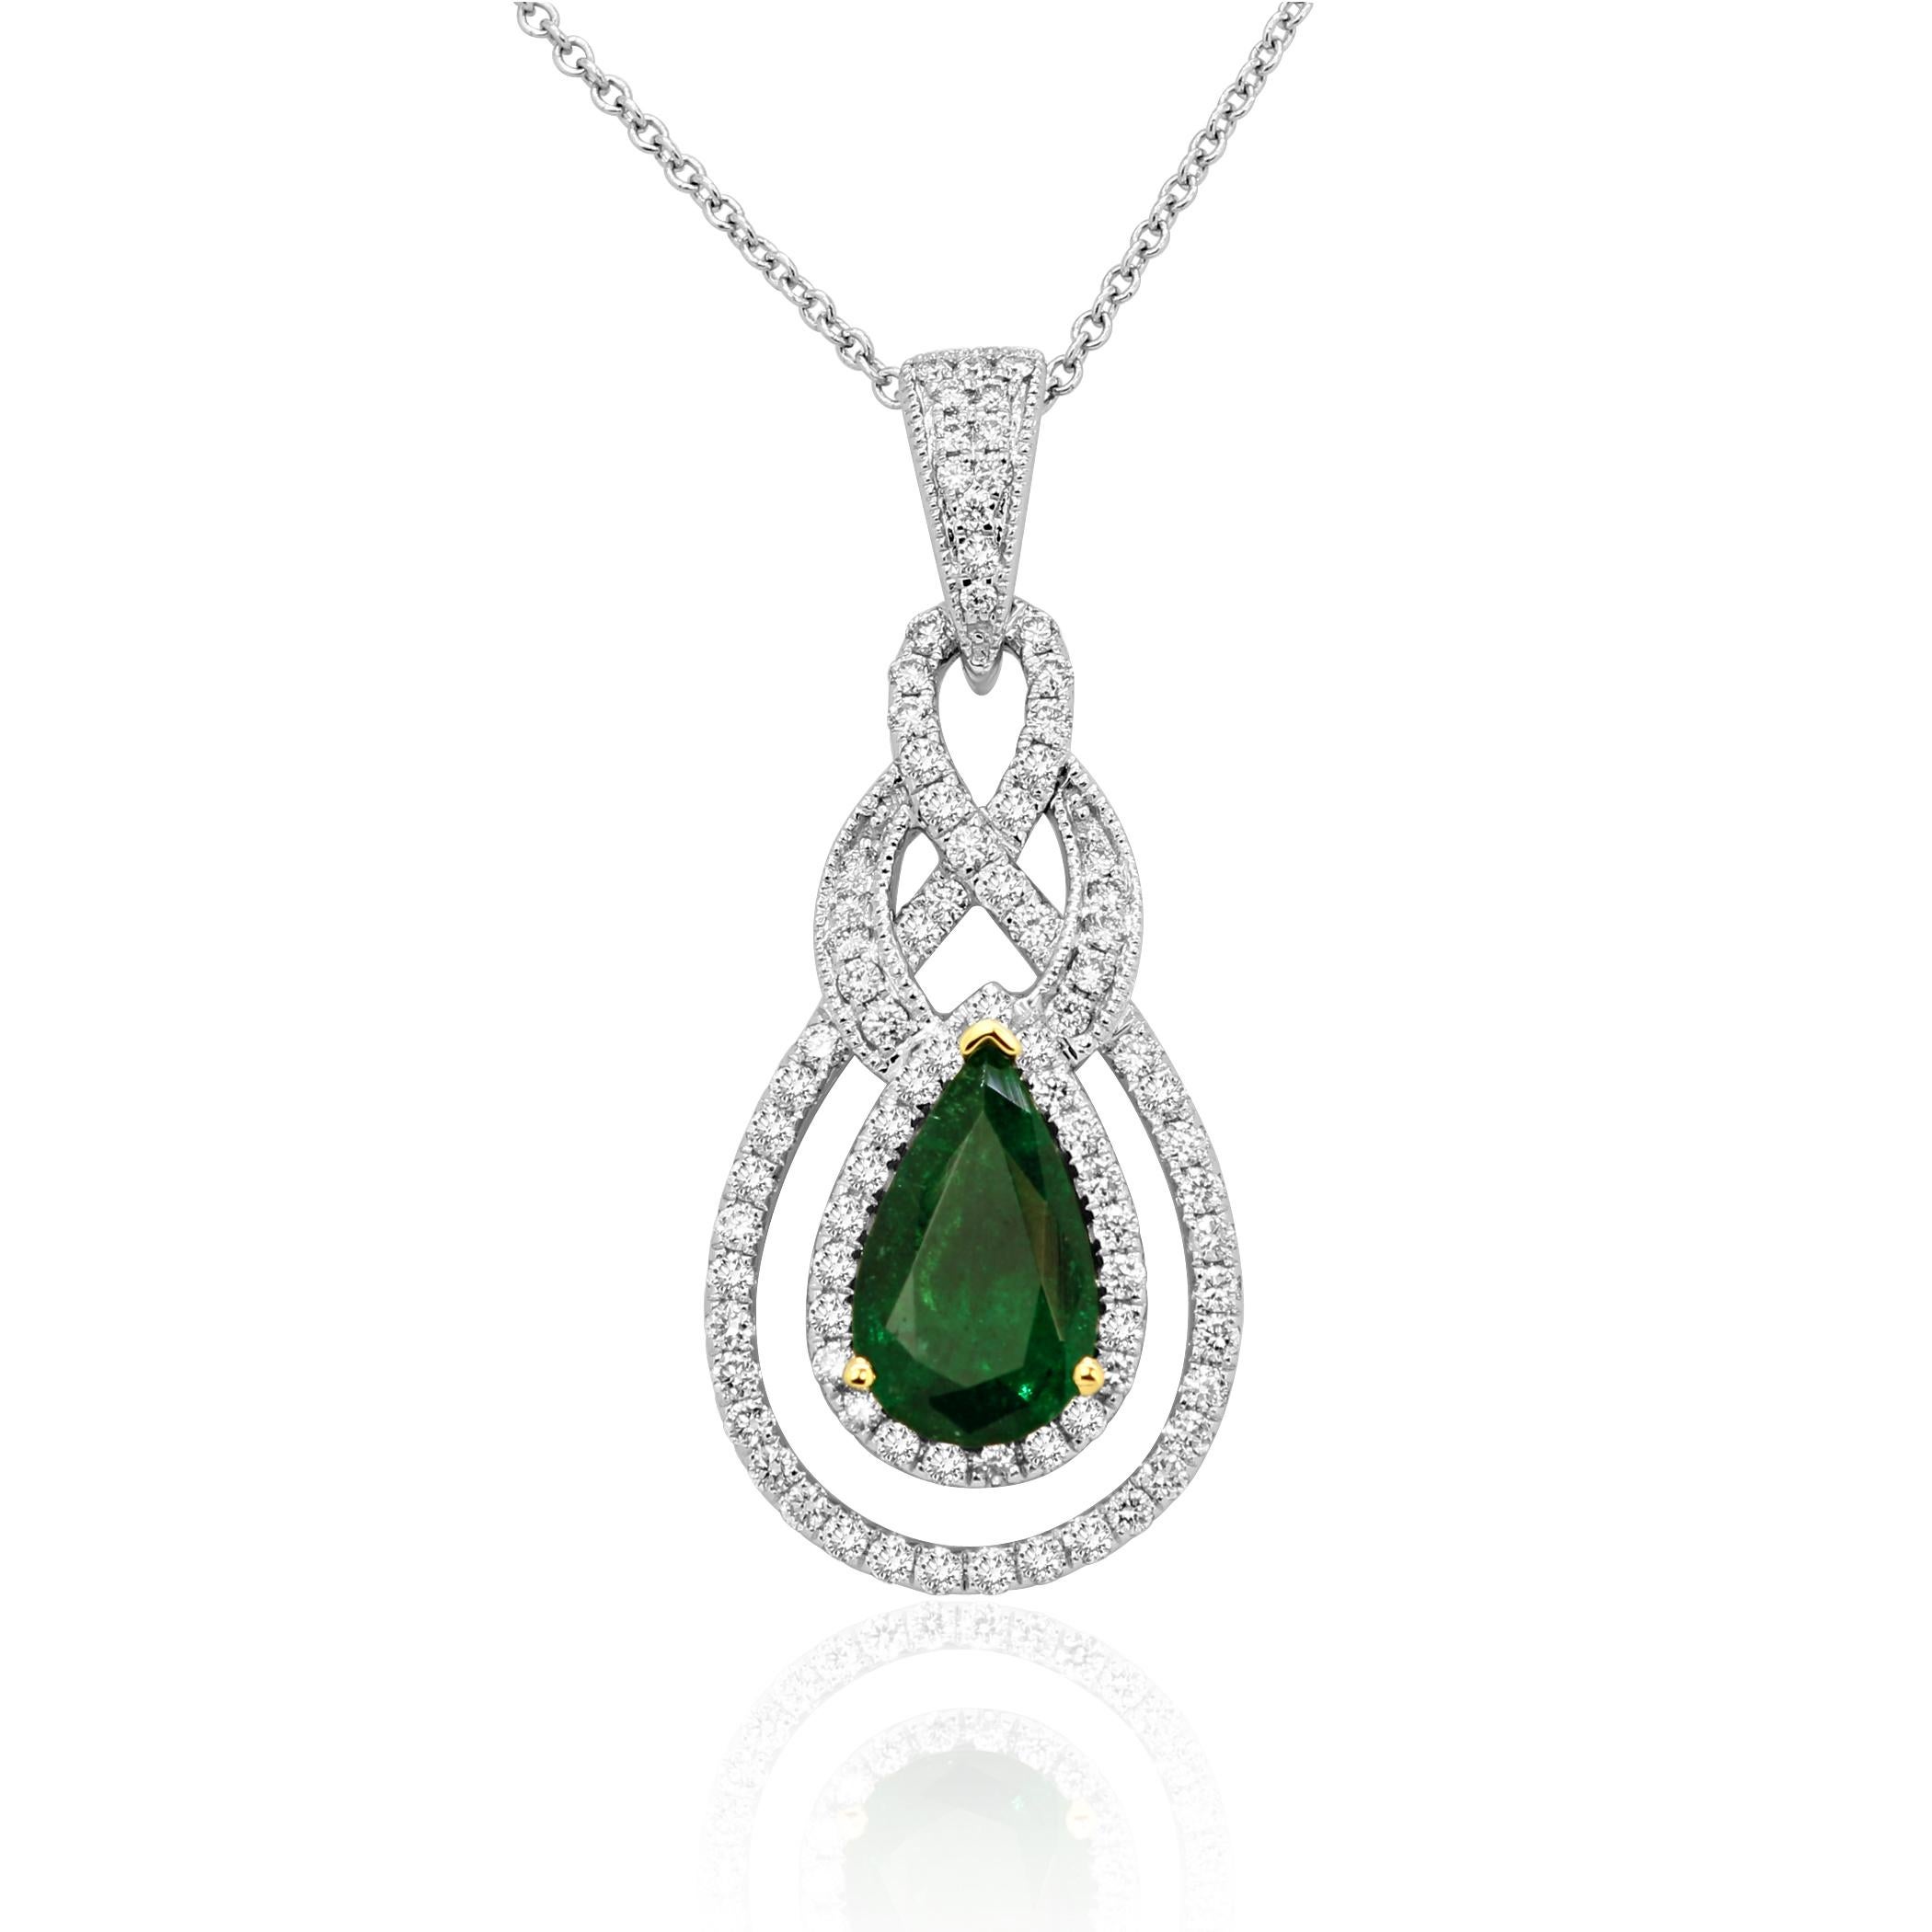 Gorgeous Emerald Pear 1.11 Carat Encircled in a Halo of White Round Diamonds 0.58 Carat in 14K White and Yellow Gold Stunning Pendant Necklace.

Style available in different price ranges. Prices are based on your selection of 4C's Cut, Color, Carat,